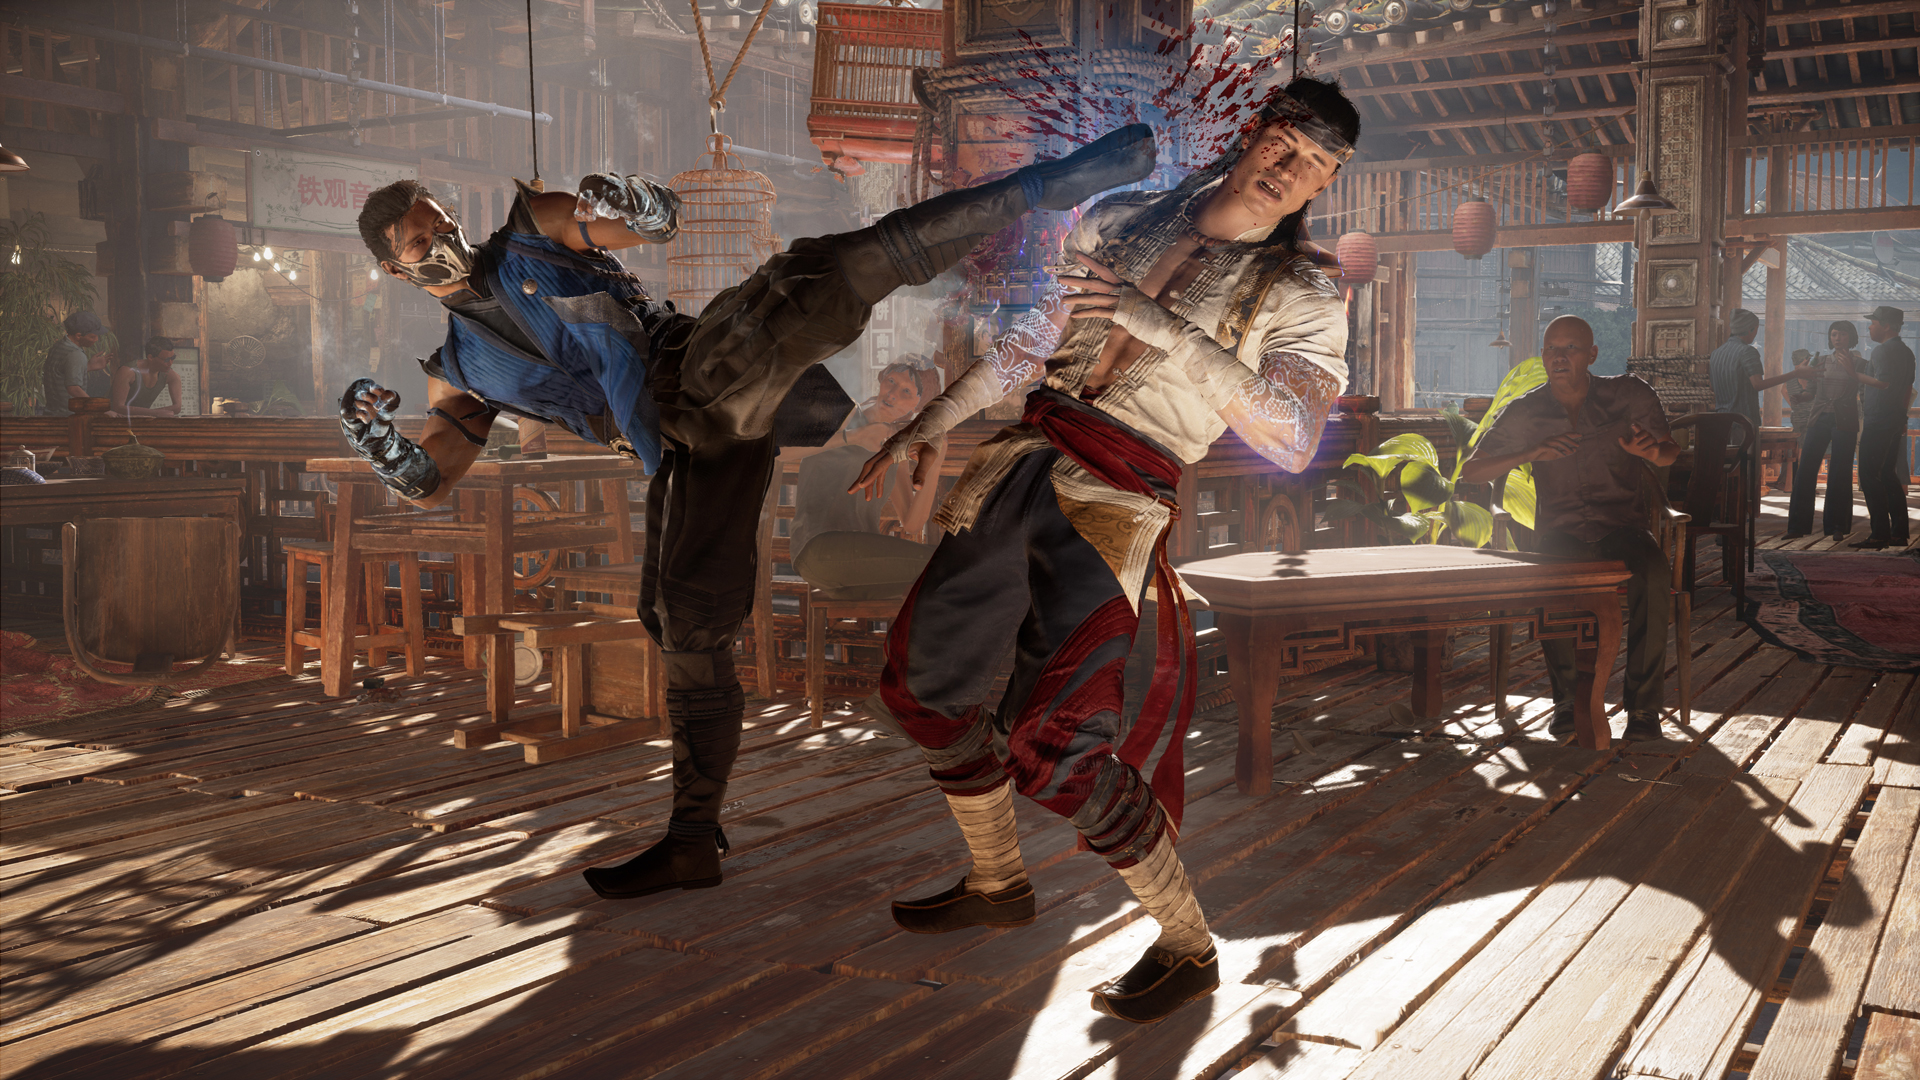 Mortal Kombat 1 Faces Unexpected Server Issues, Patch Pushed to Early Next Week